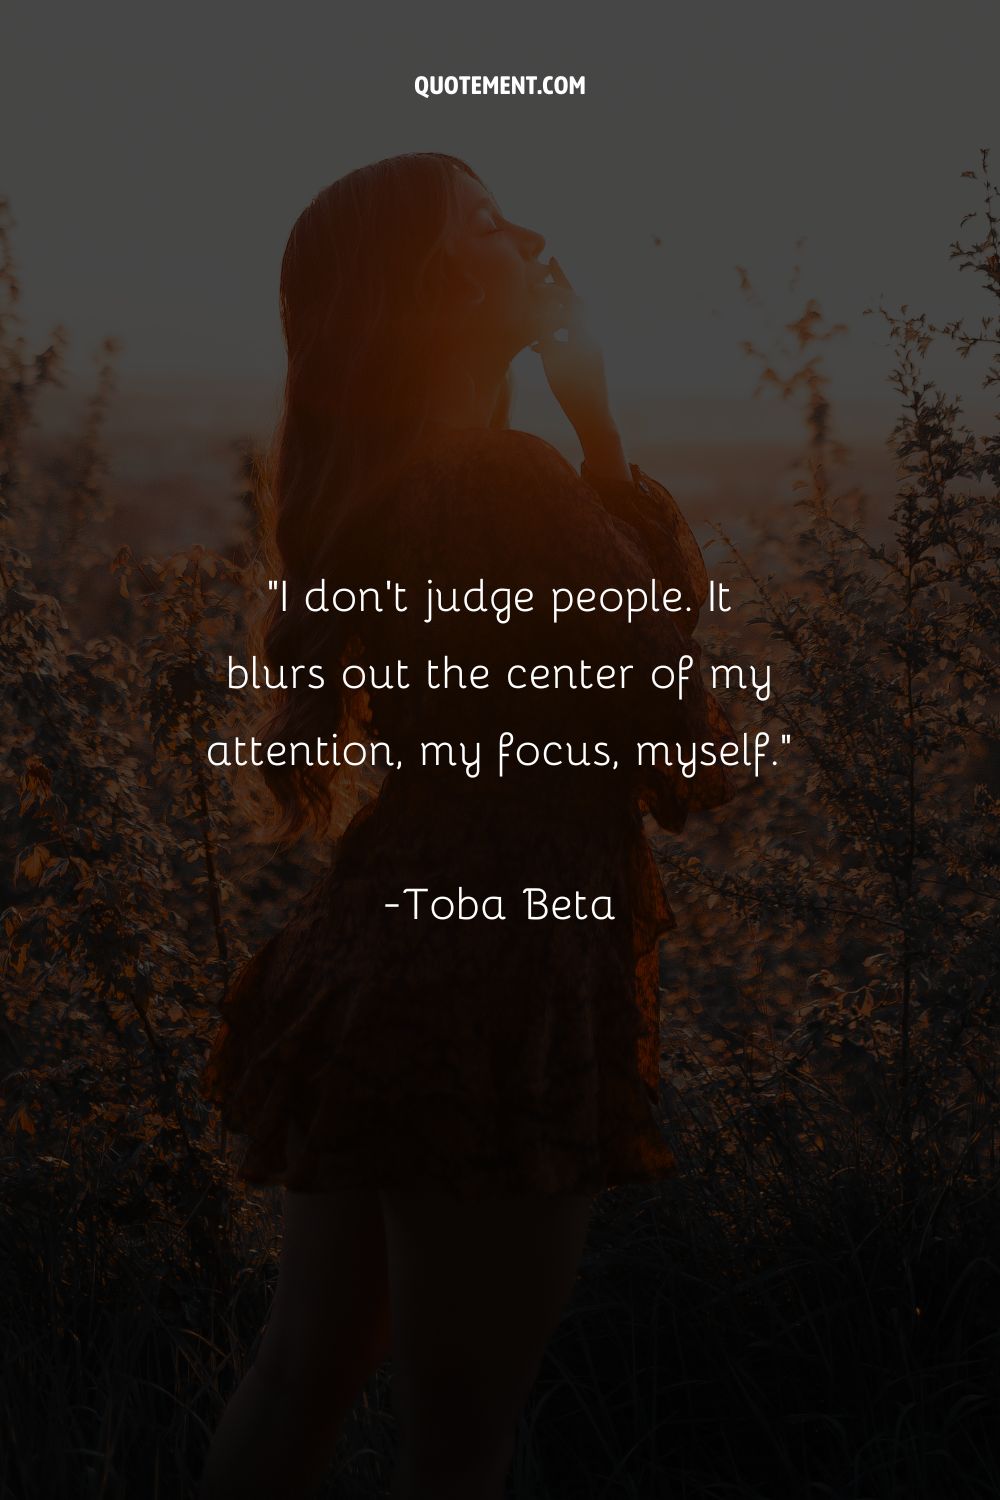 I don't judge people. It blurs out the center of my attention, my focus, myself.